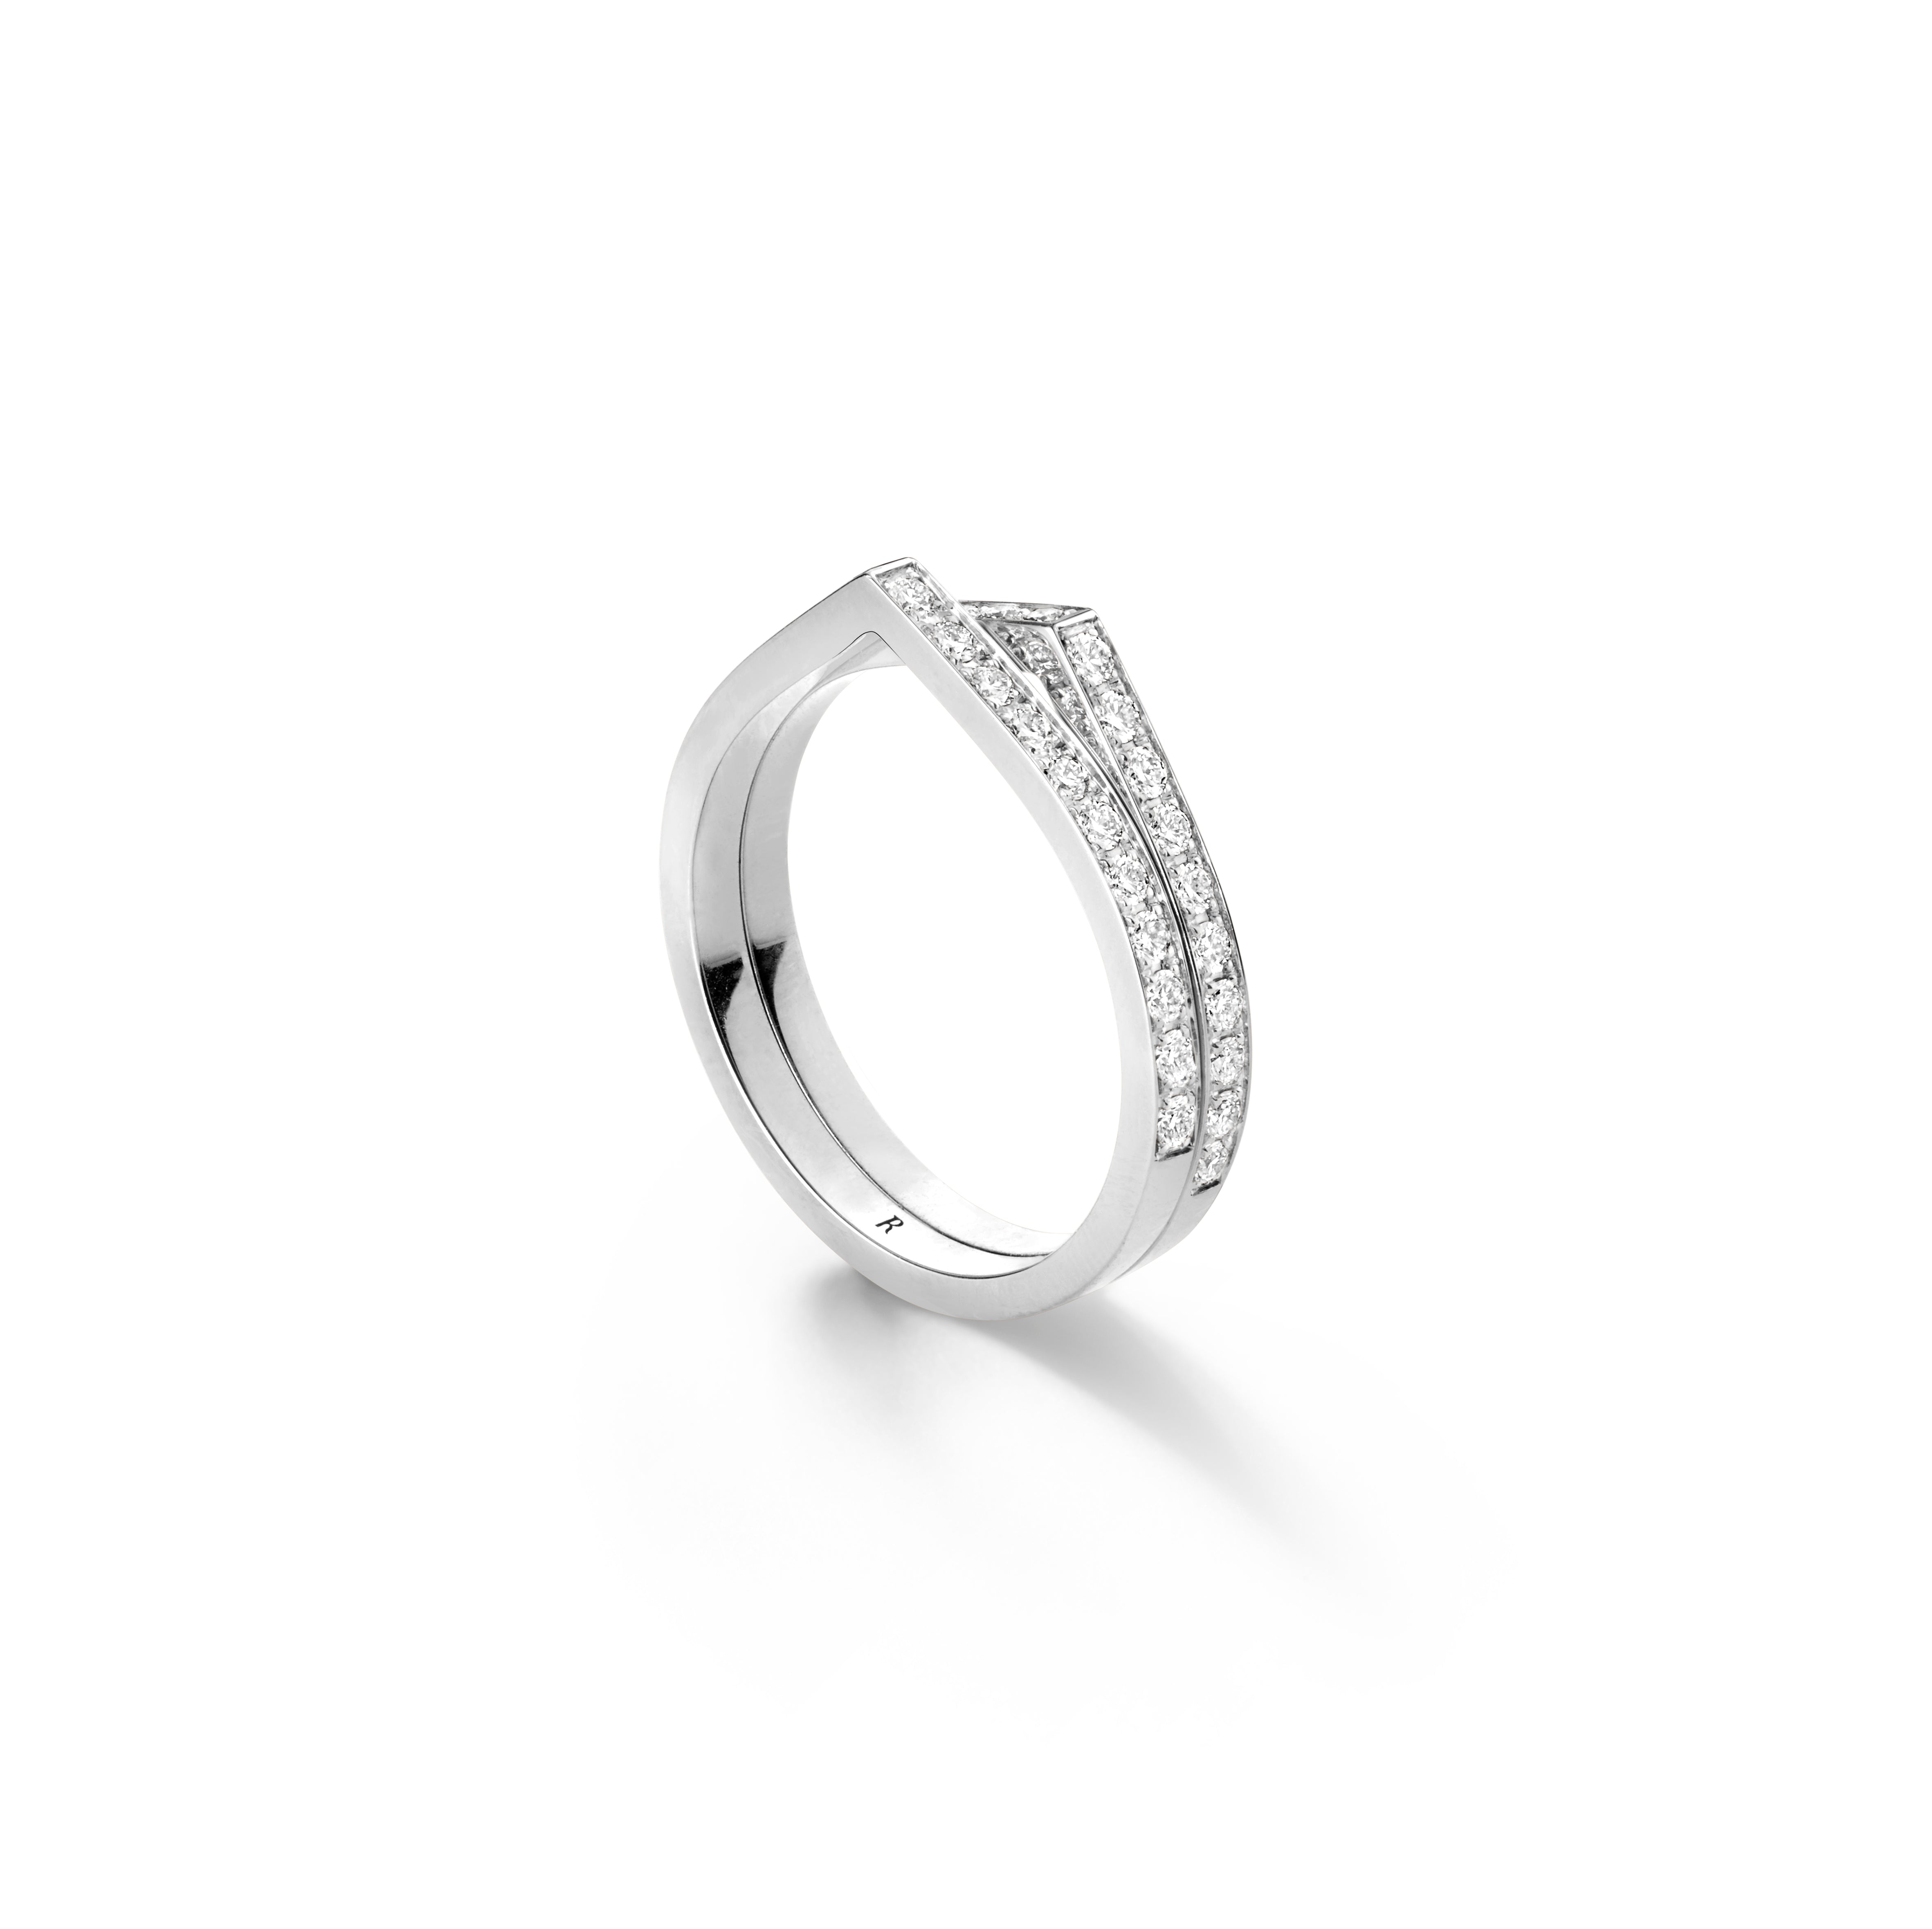 Antifer 2 rows ring in white gold paved with diamonds